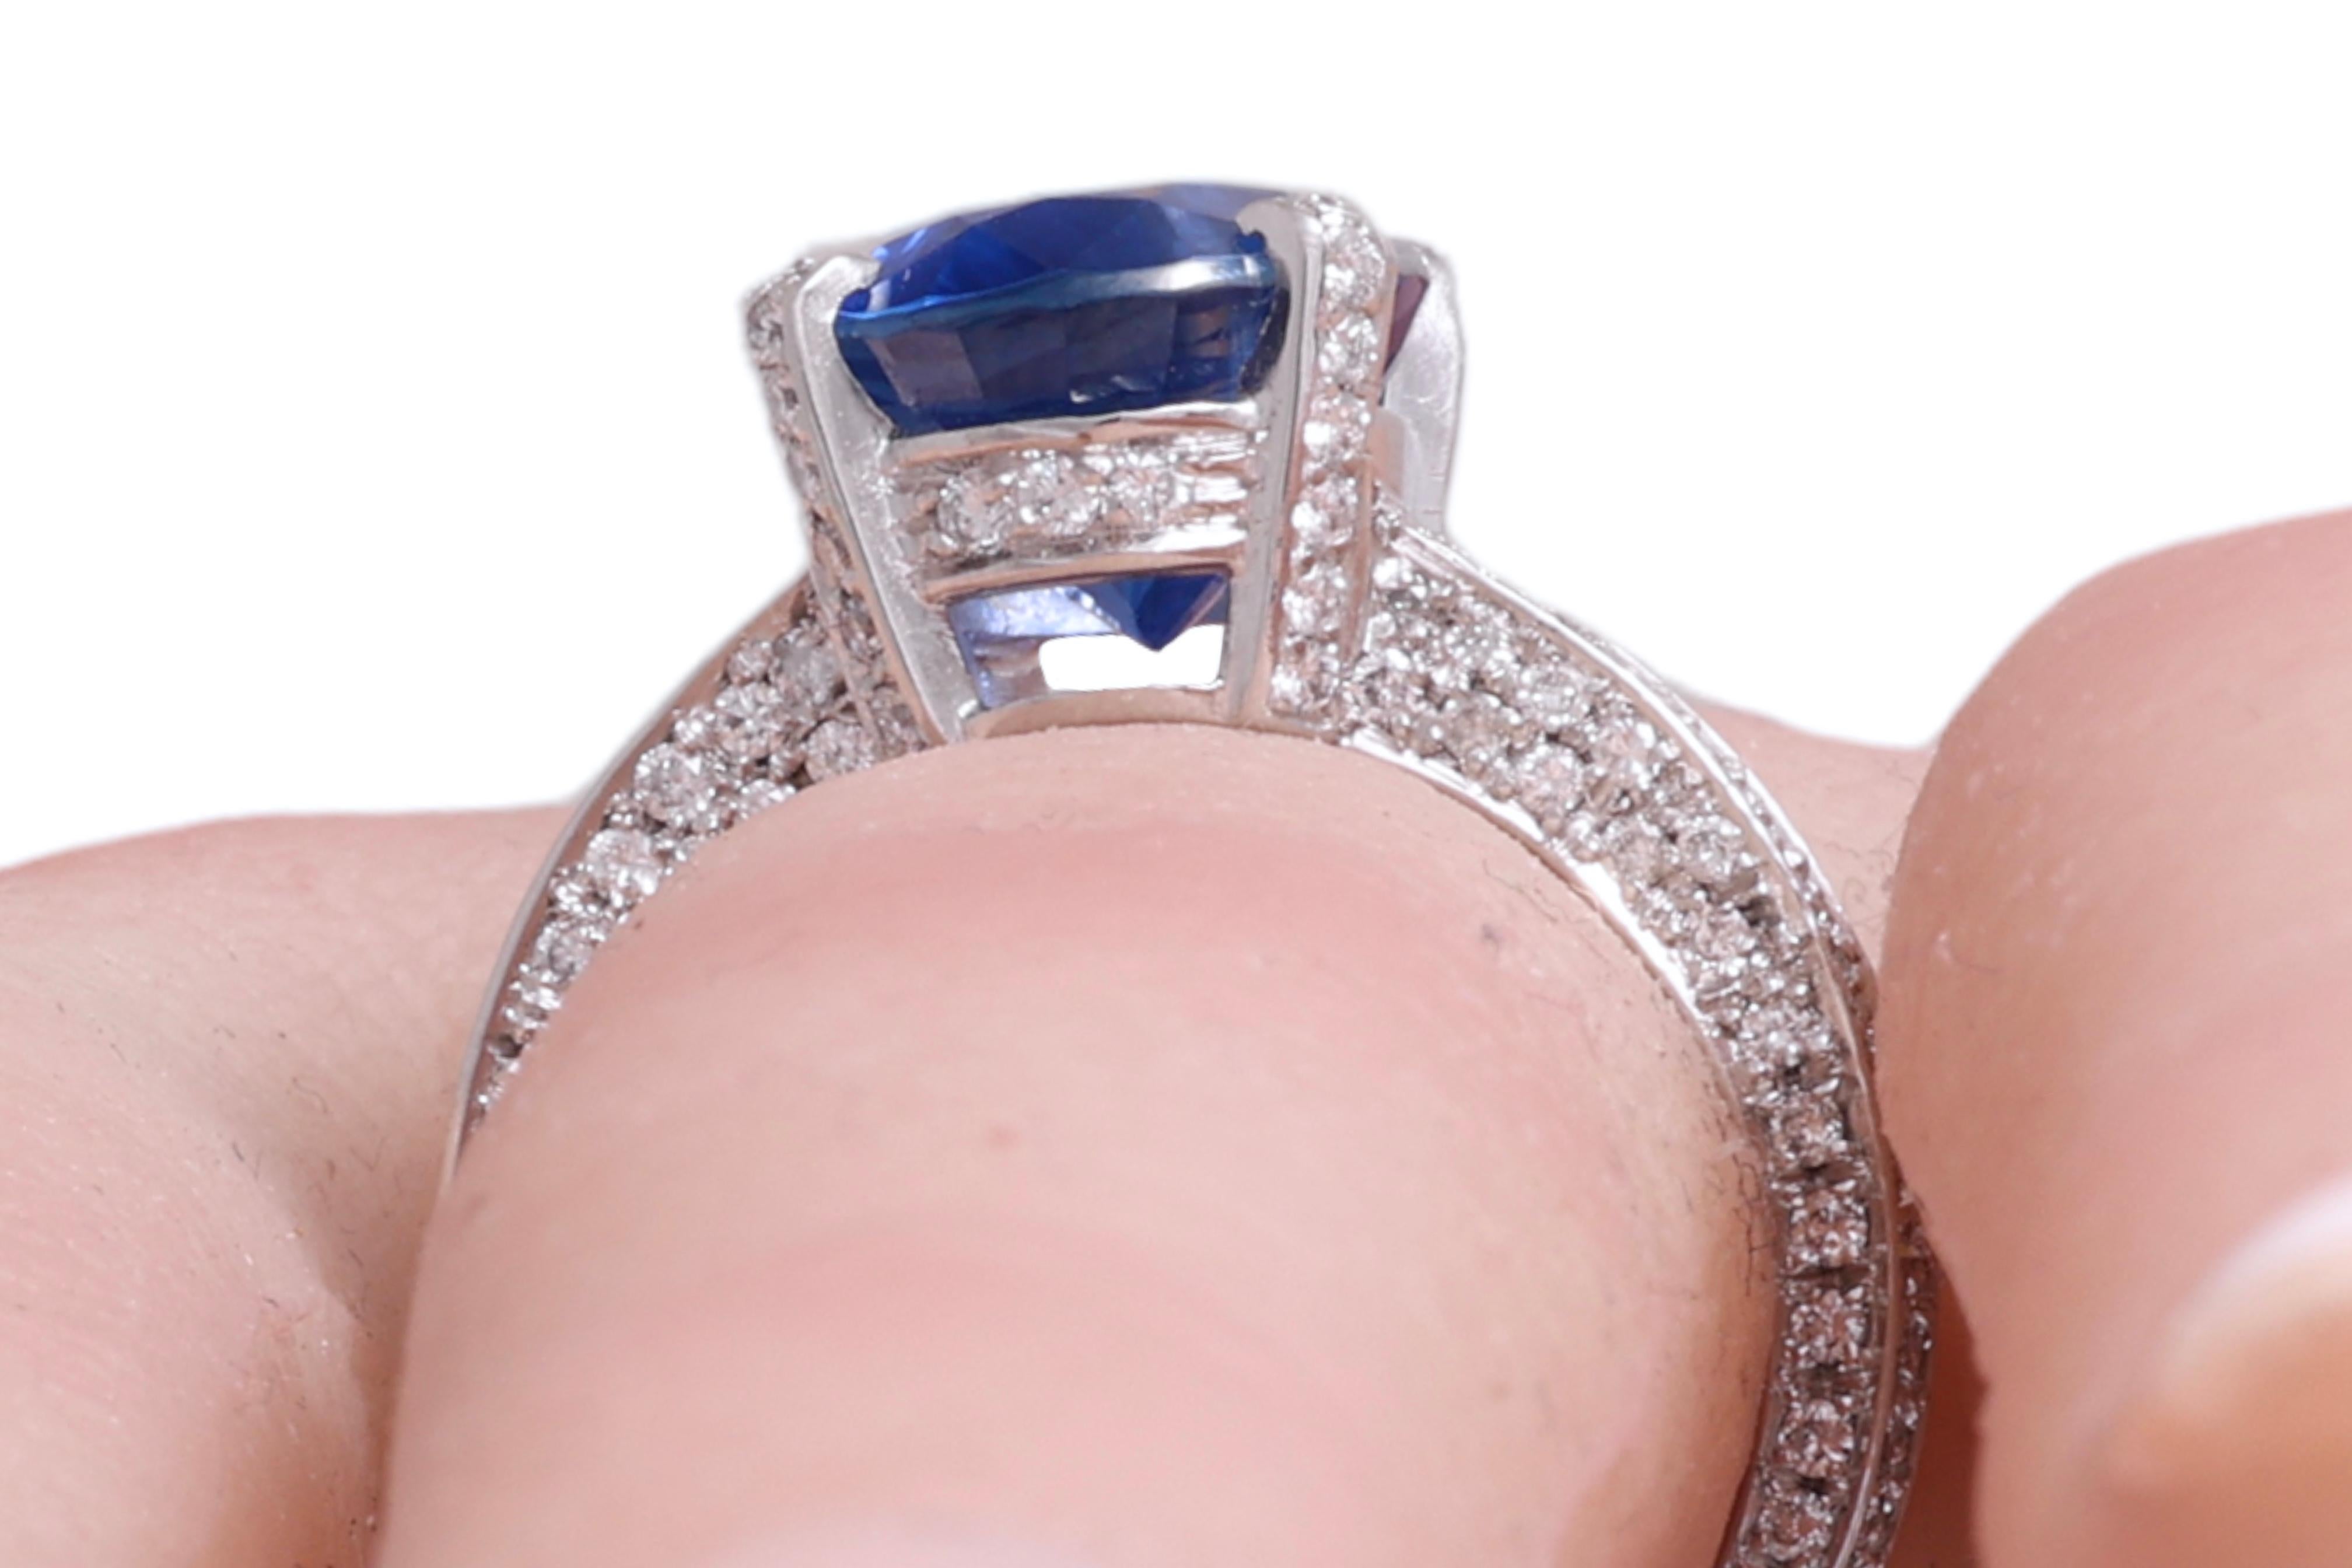  AGL Certified 18kt. White Gold Ring 6.32 ct. Ceylon Sapphire &1.62 ct. Diamonds For Sale 4